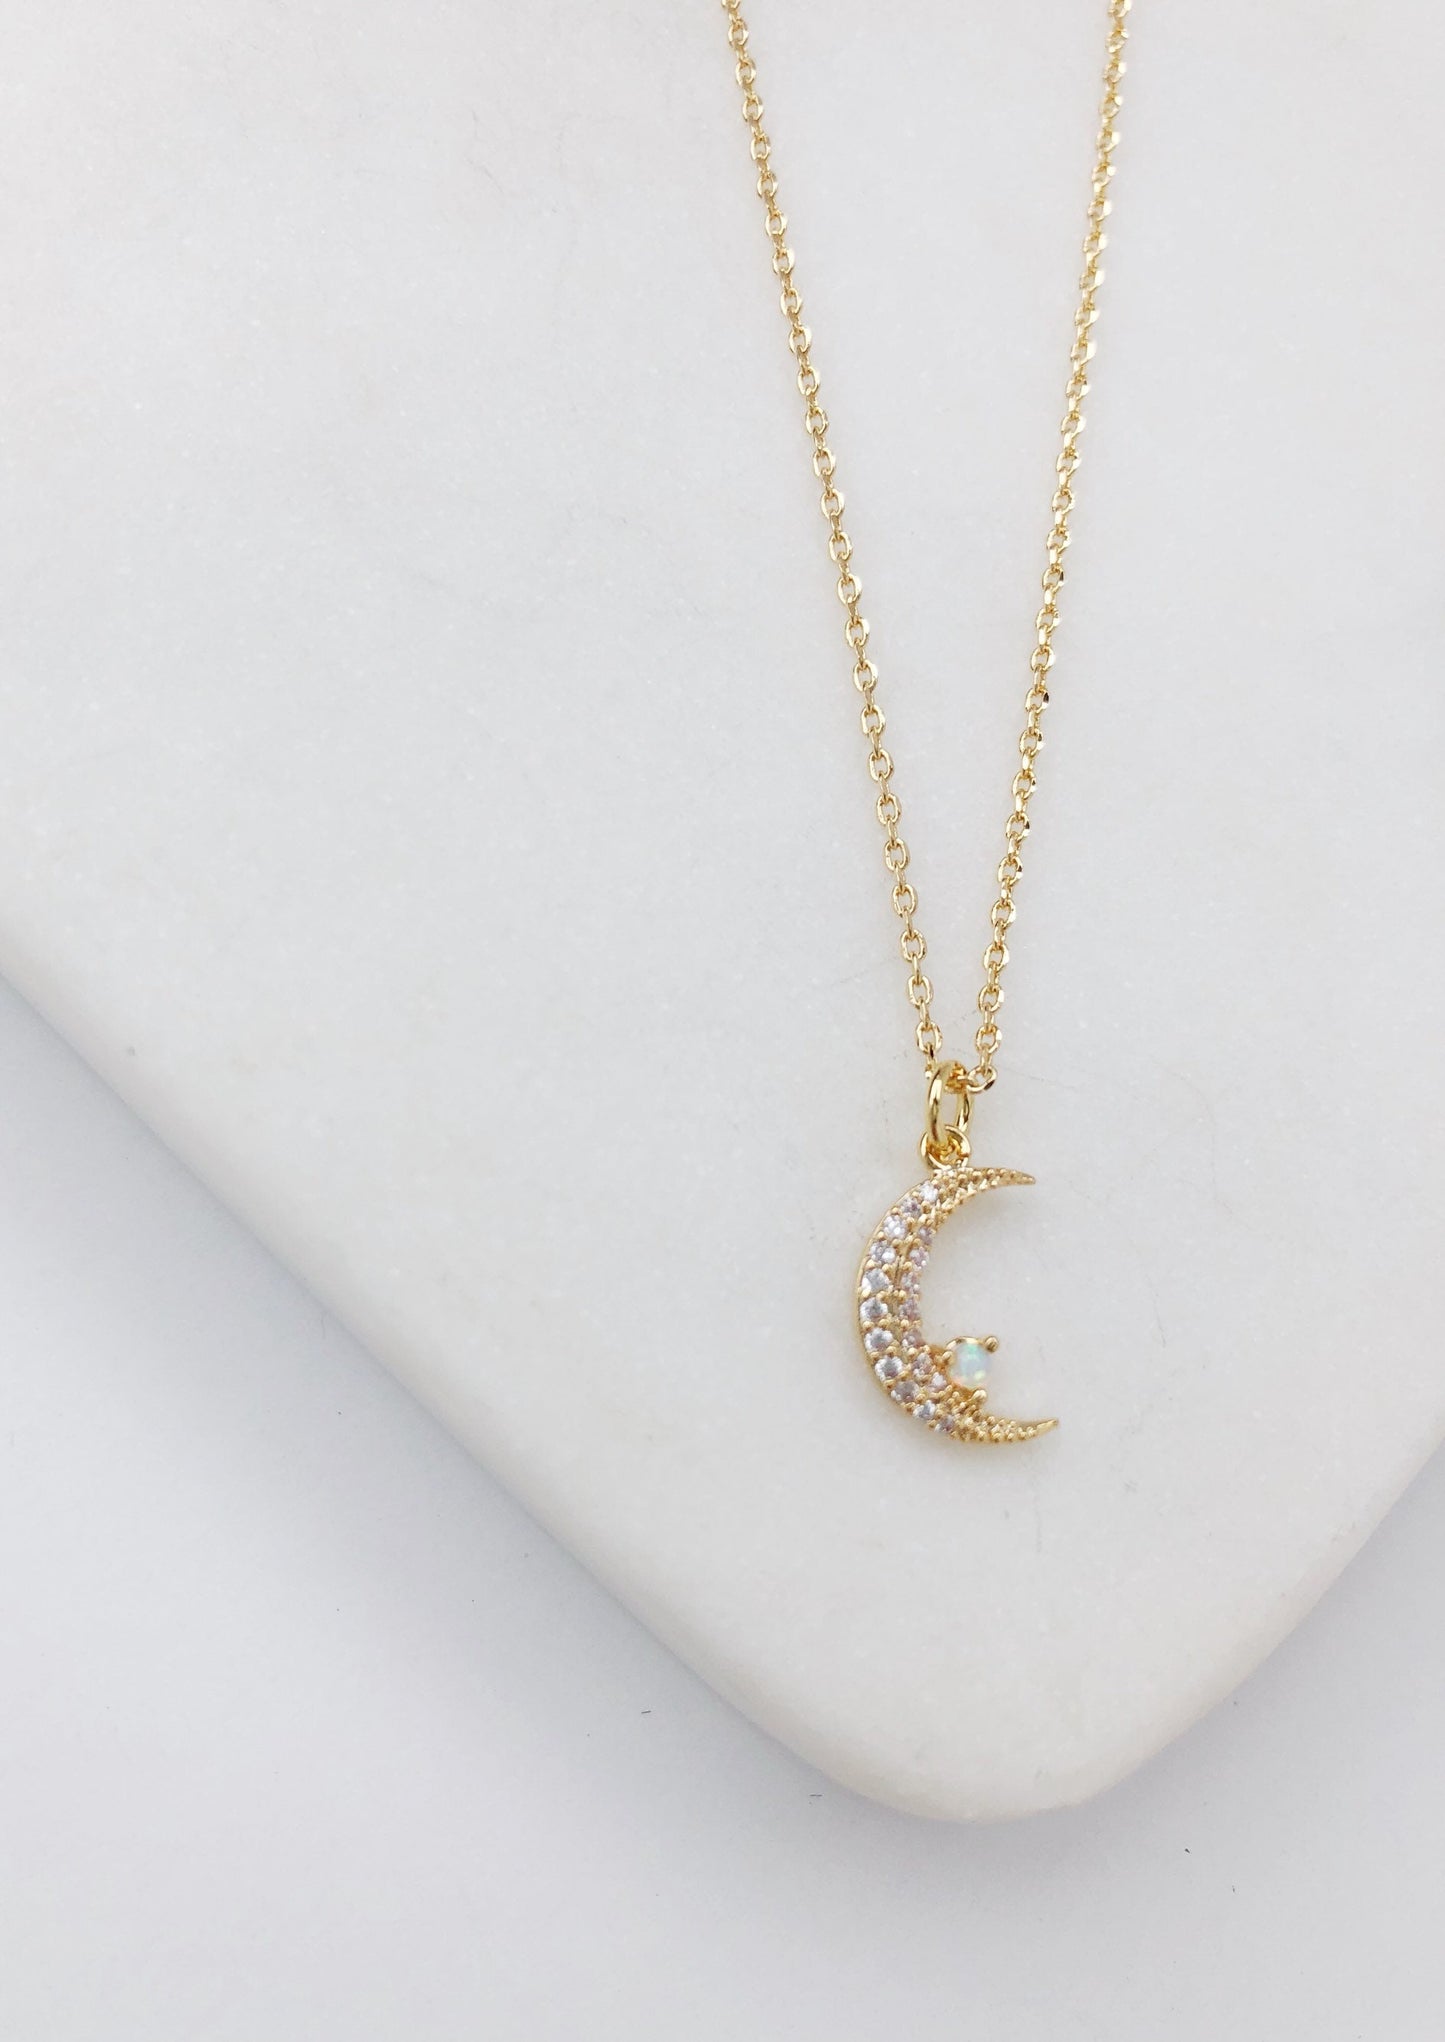 Moon necklace, opal necklace, dainty necklace, necklaces for women, gold necklace, opal necklace, dainty jewelry, birthday